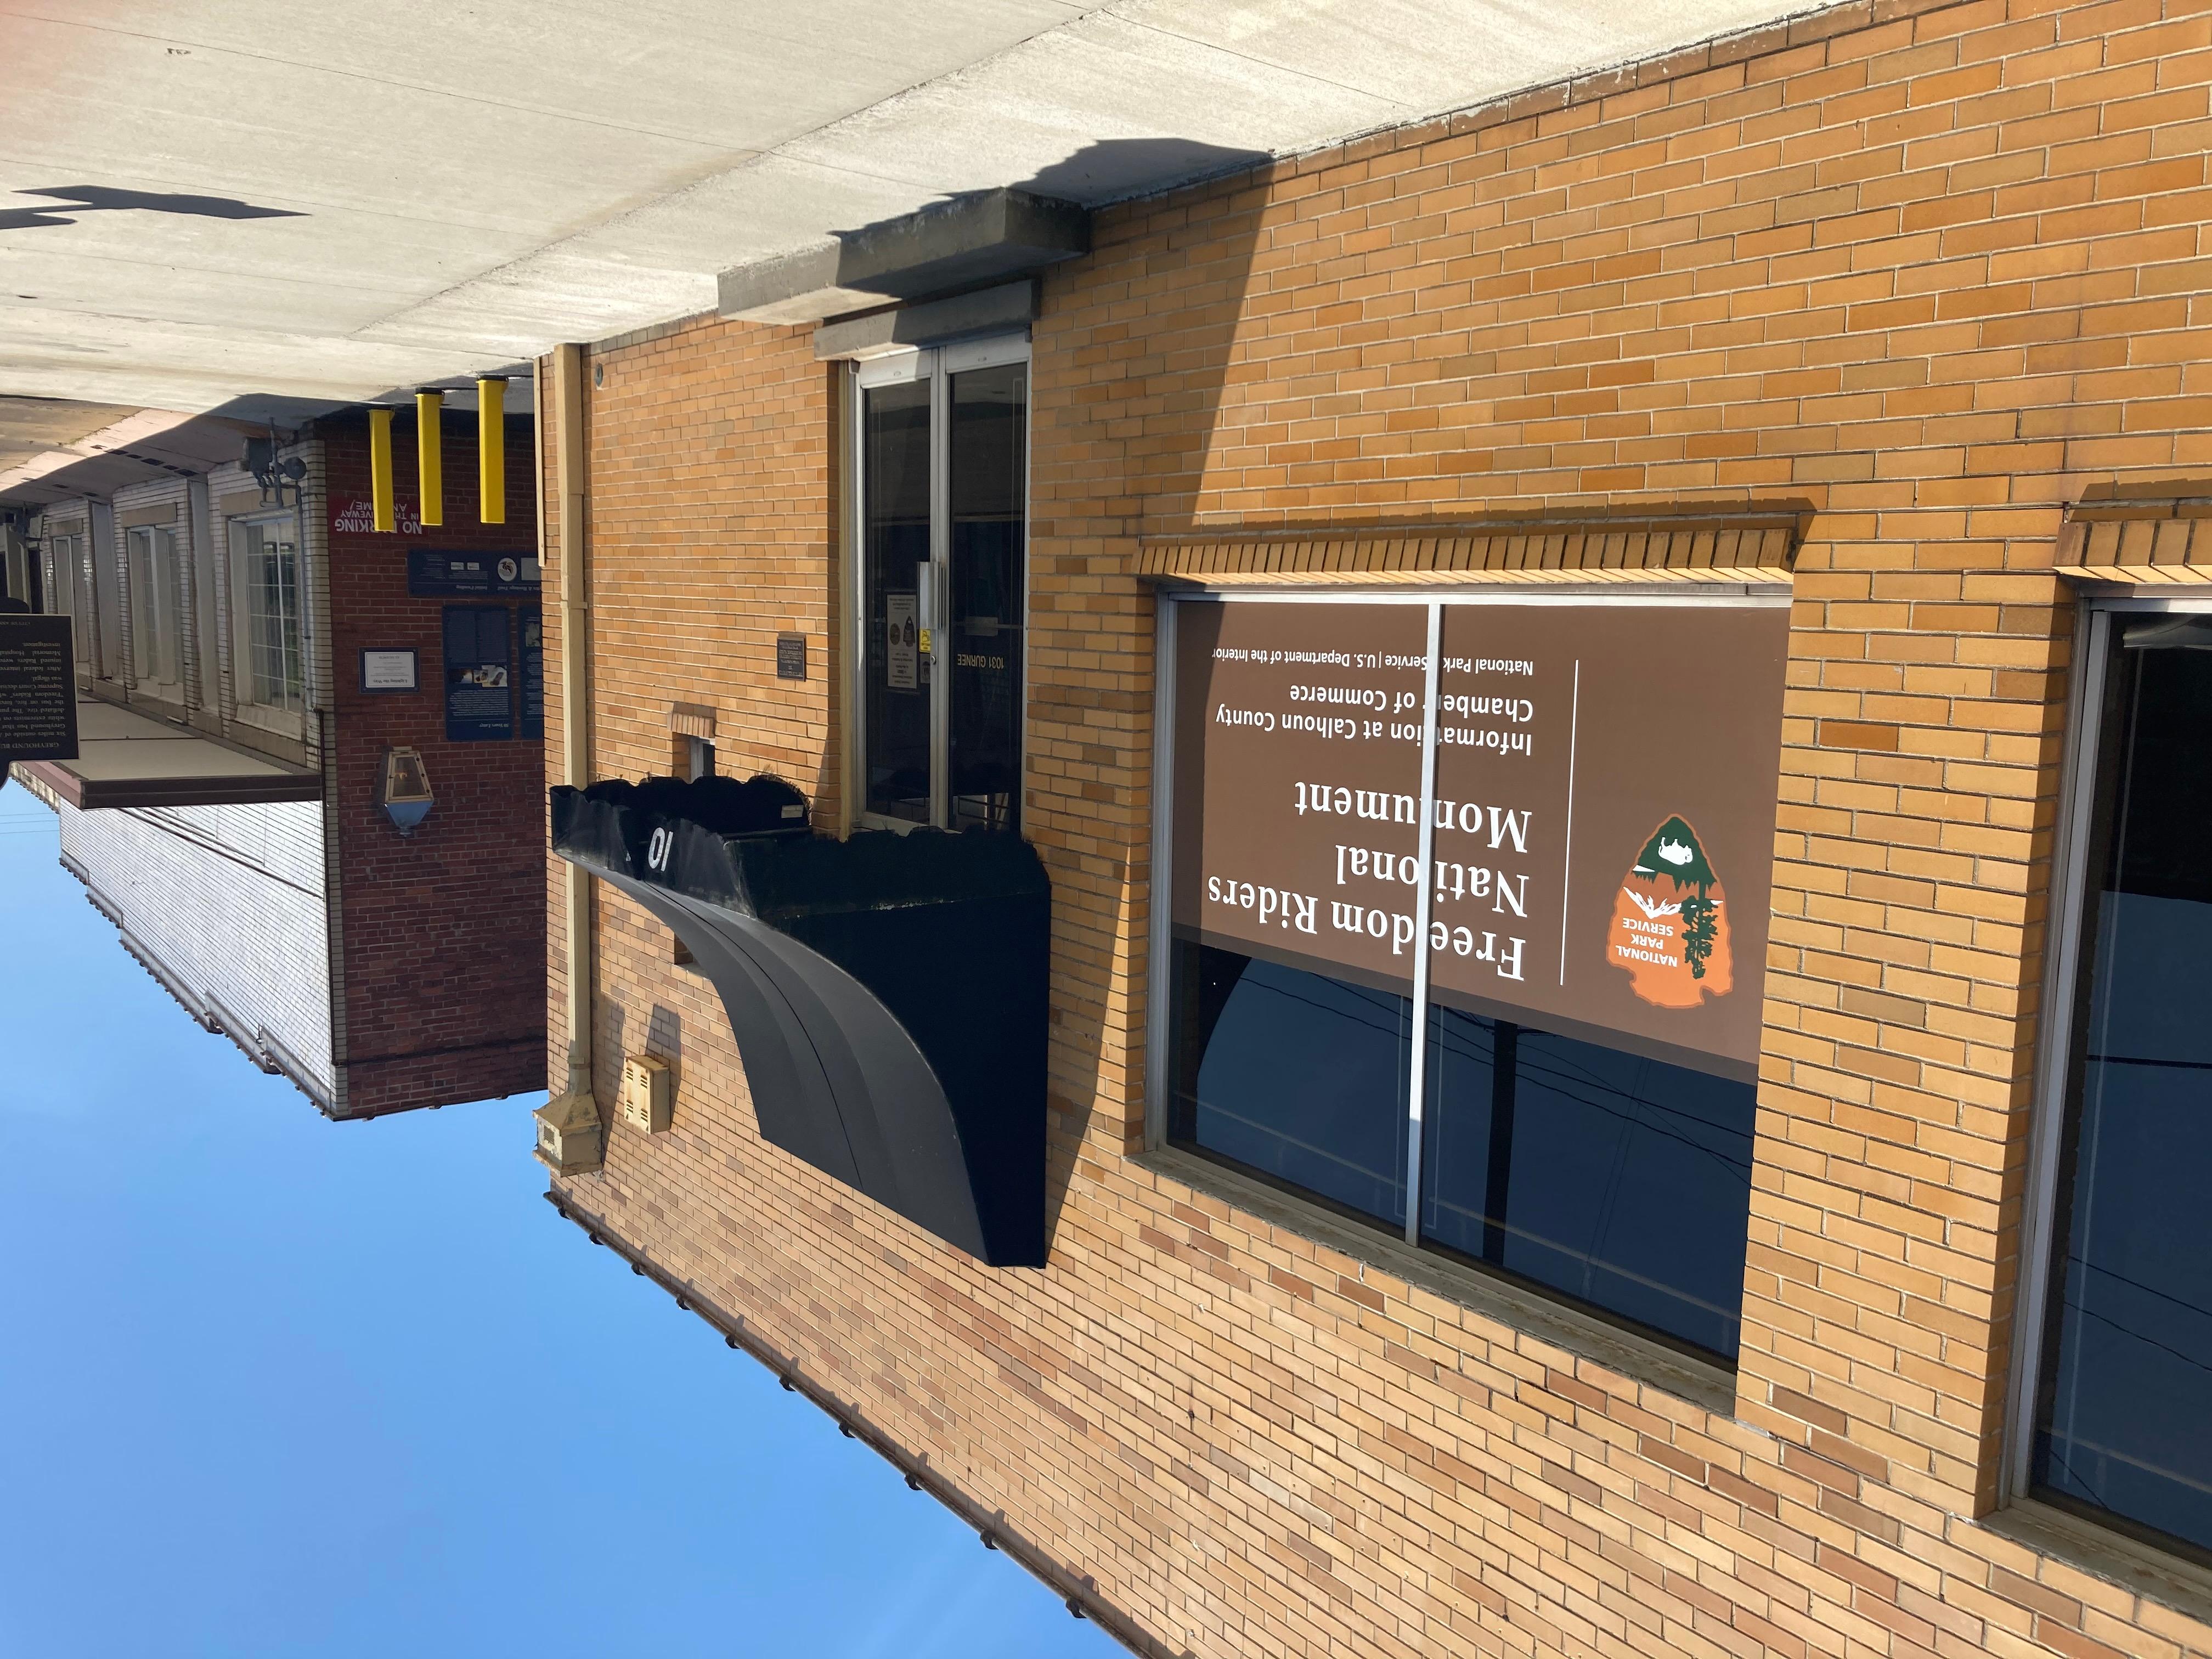 street view of a yellow brick bus depot, with a black awning and NPS sign, and an alley entrance.